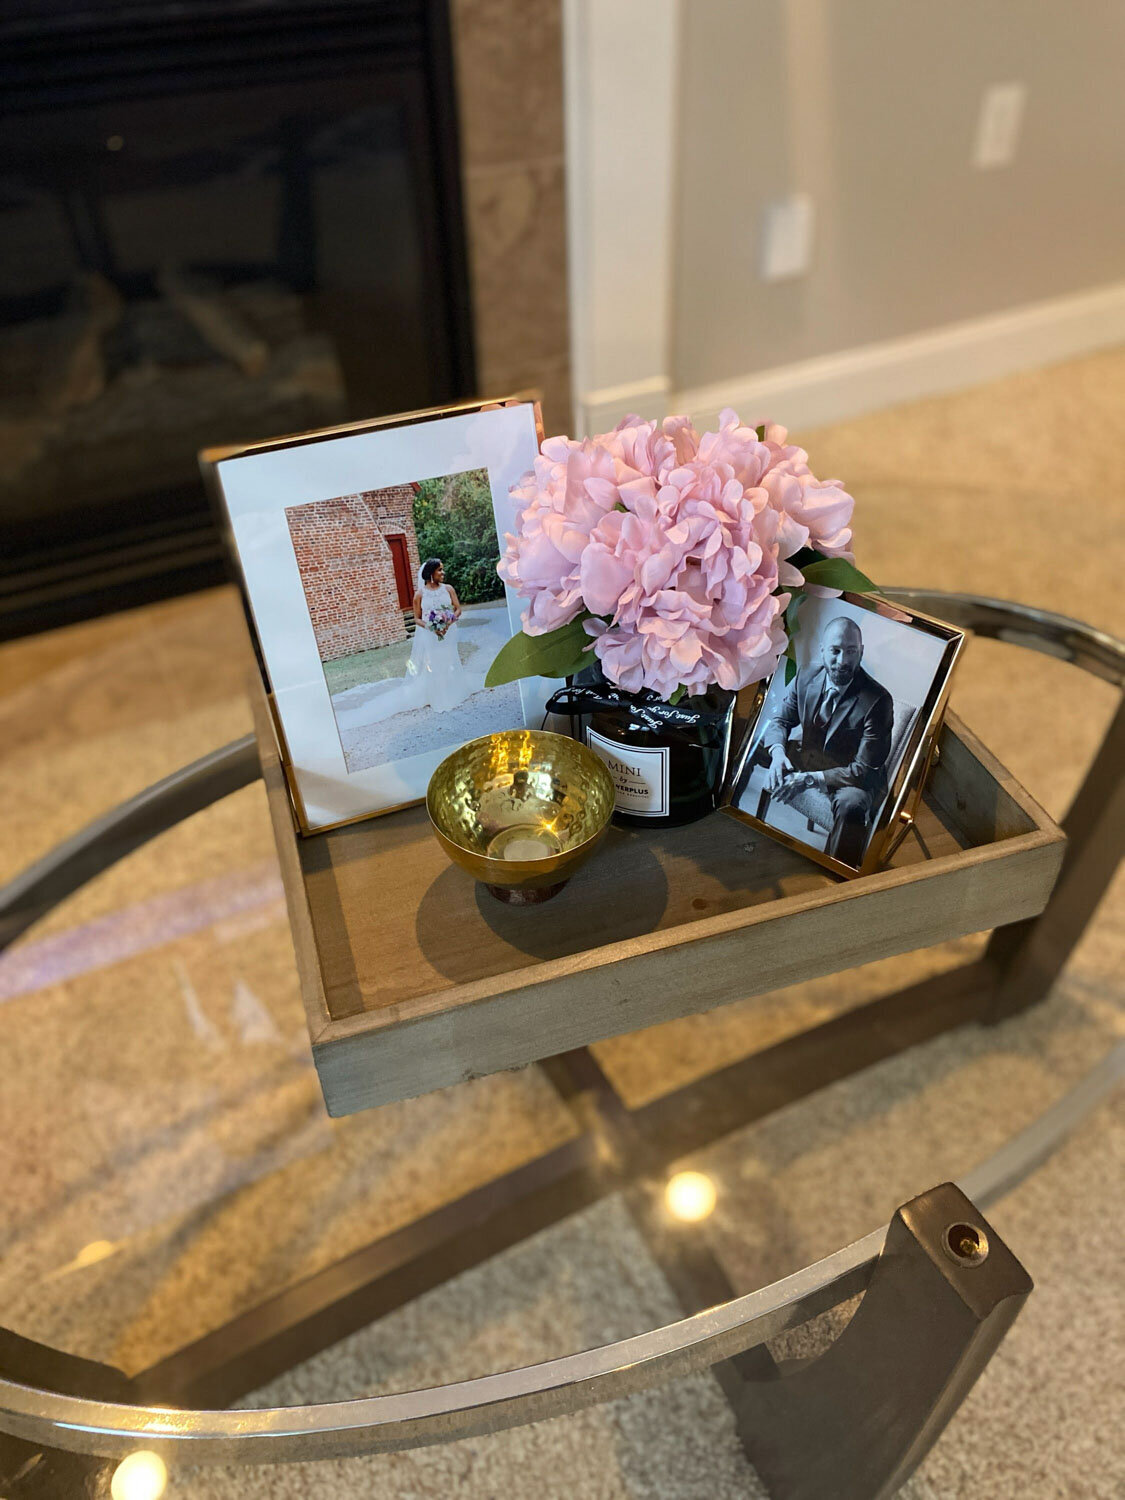 Peacock & Dahlia coffee table styling rustic glam interior design (1 of 1)